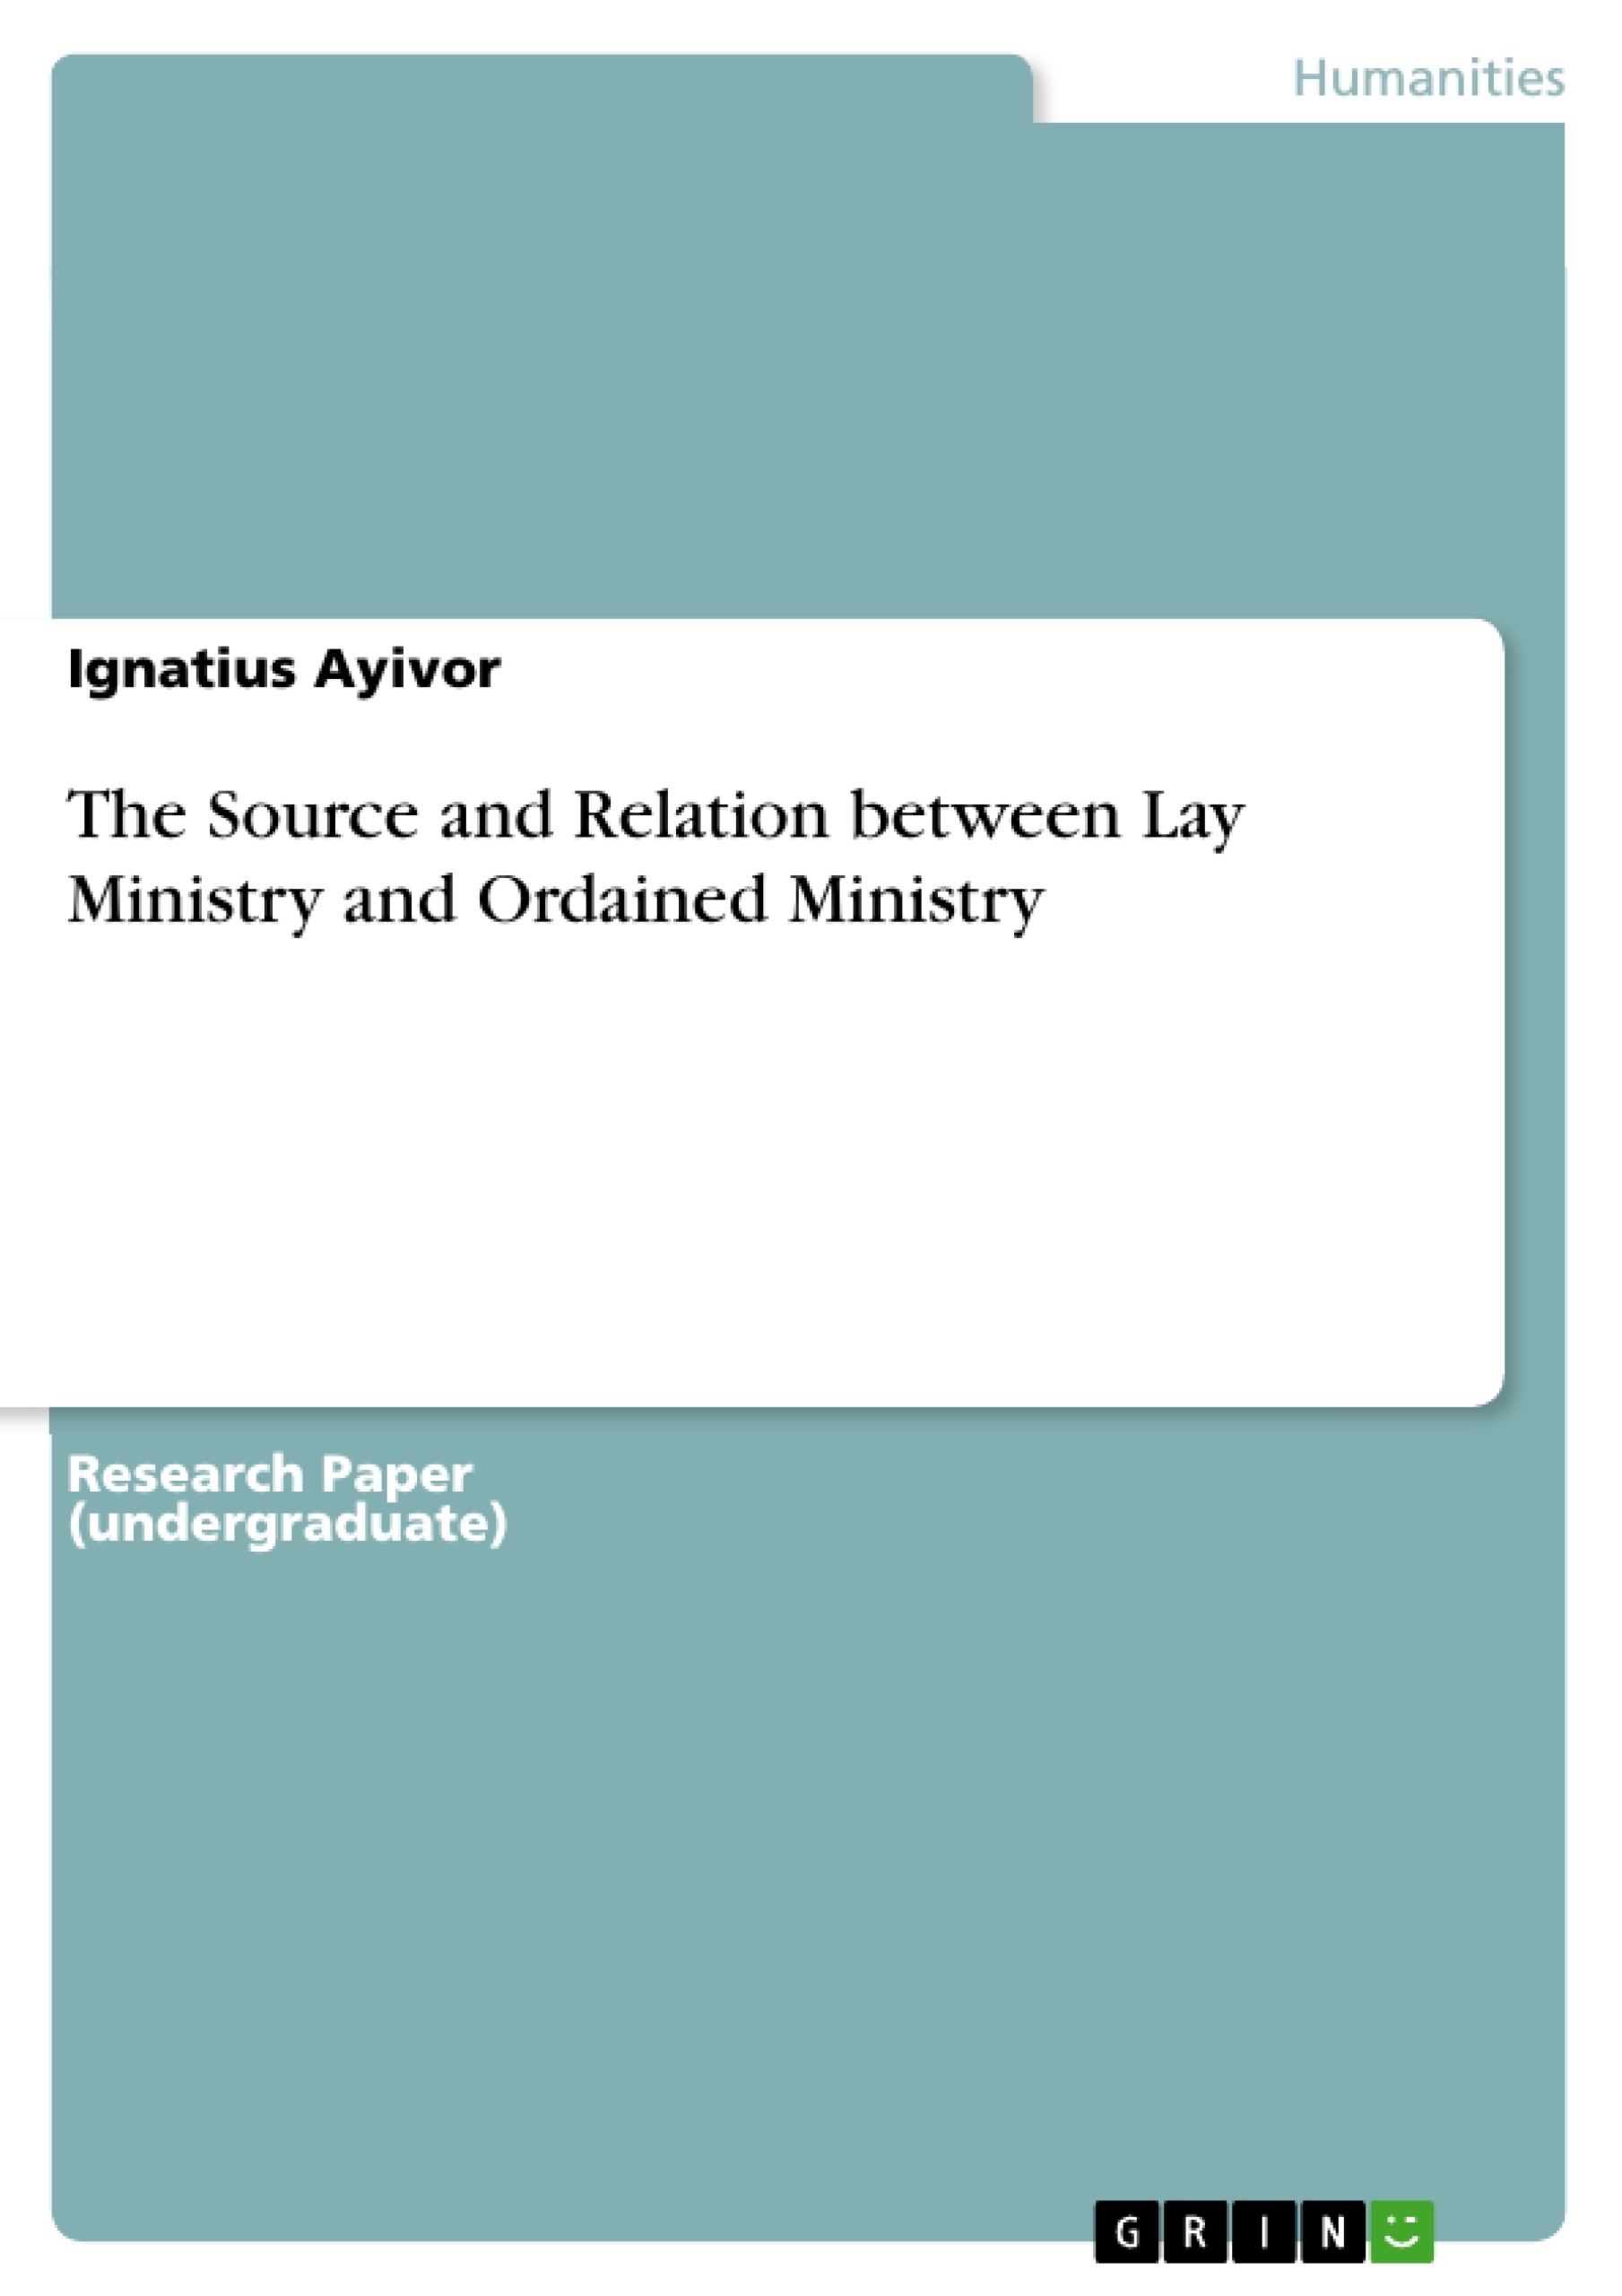 Título: The Source and Relation between Lay Ministry and Ordained Ministry